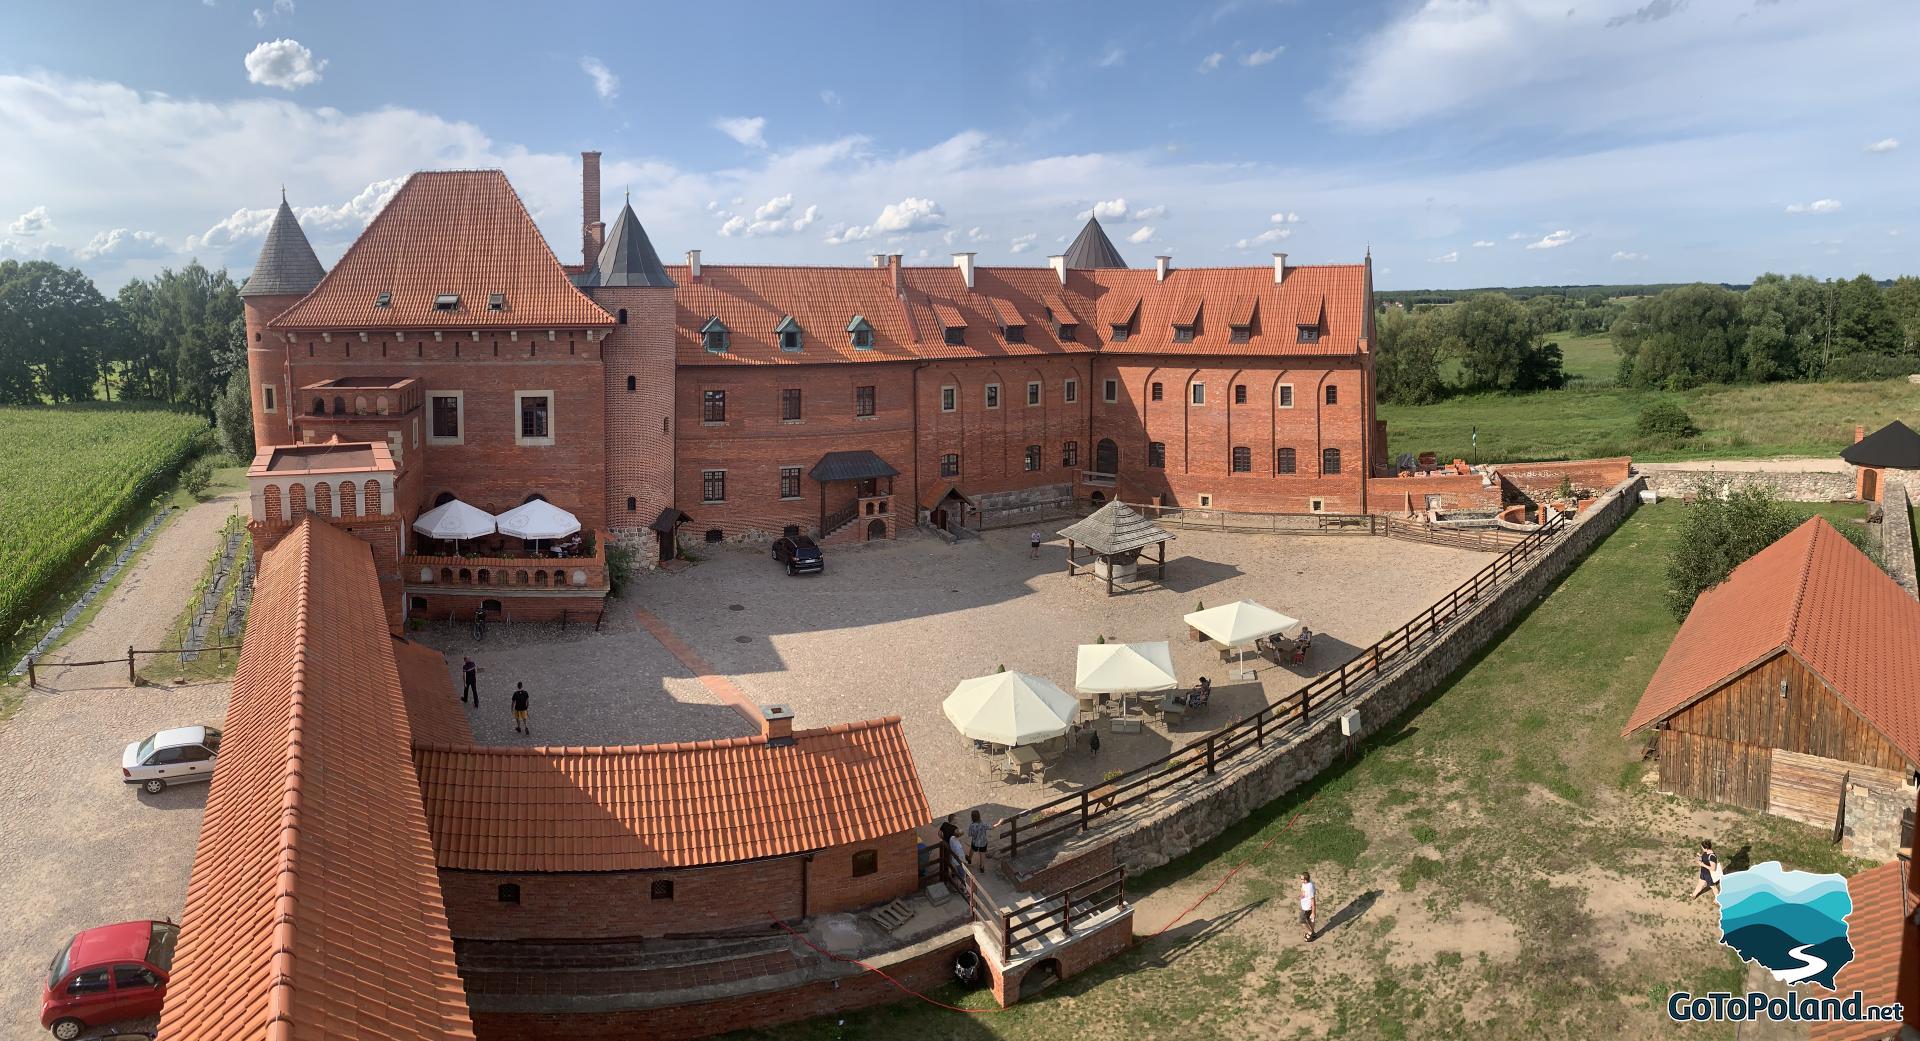 panoramic photo of a restored castle made of red bricks